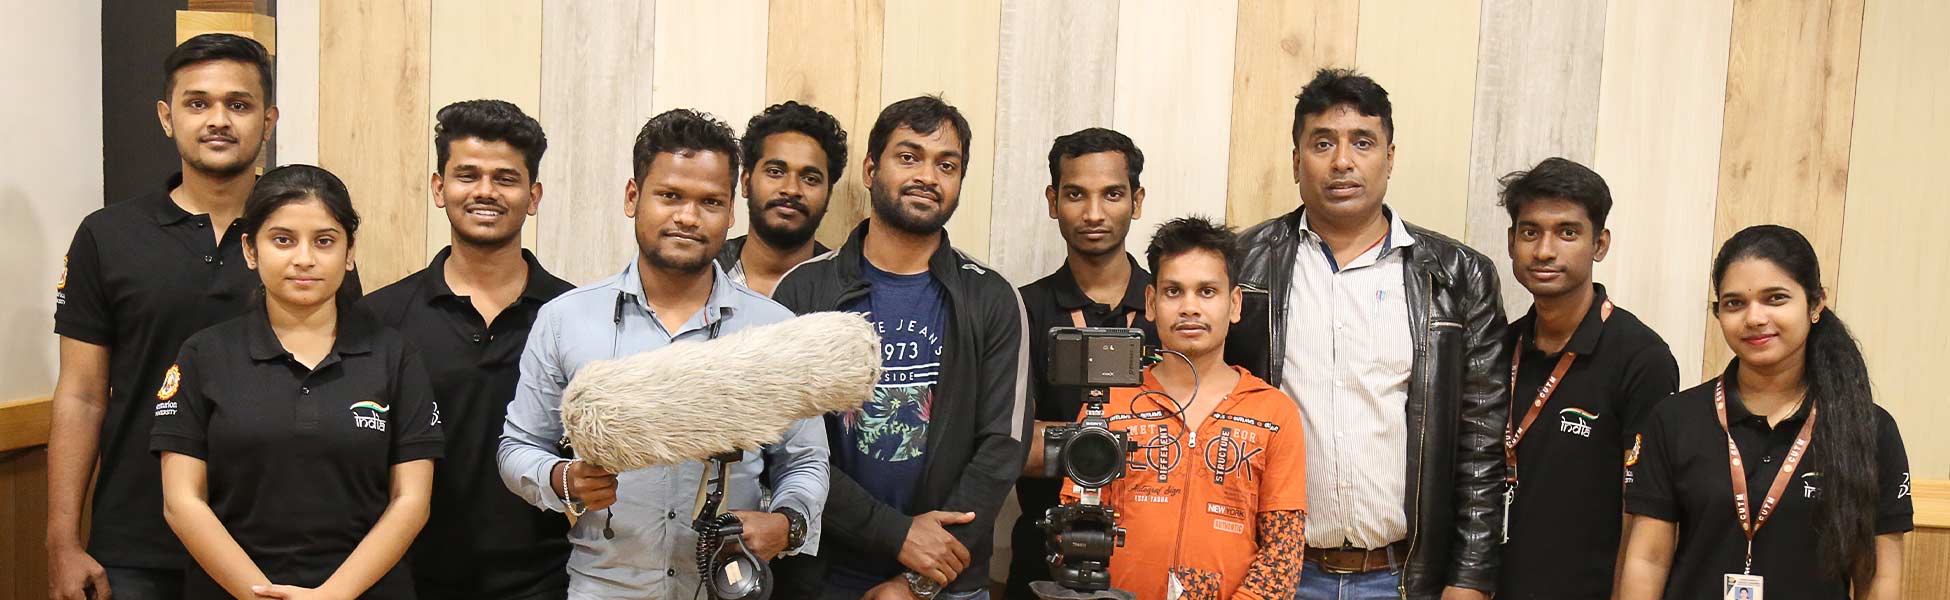 film production services in india, video production services in india, tv production services in india, production services in india